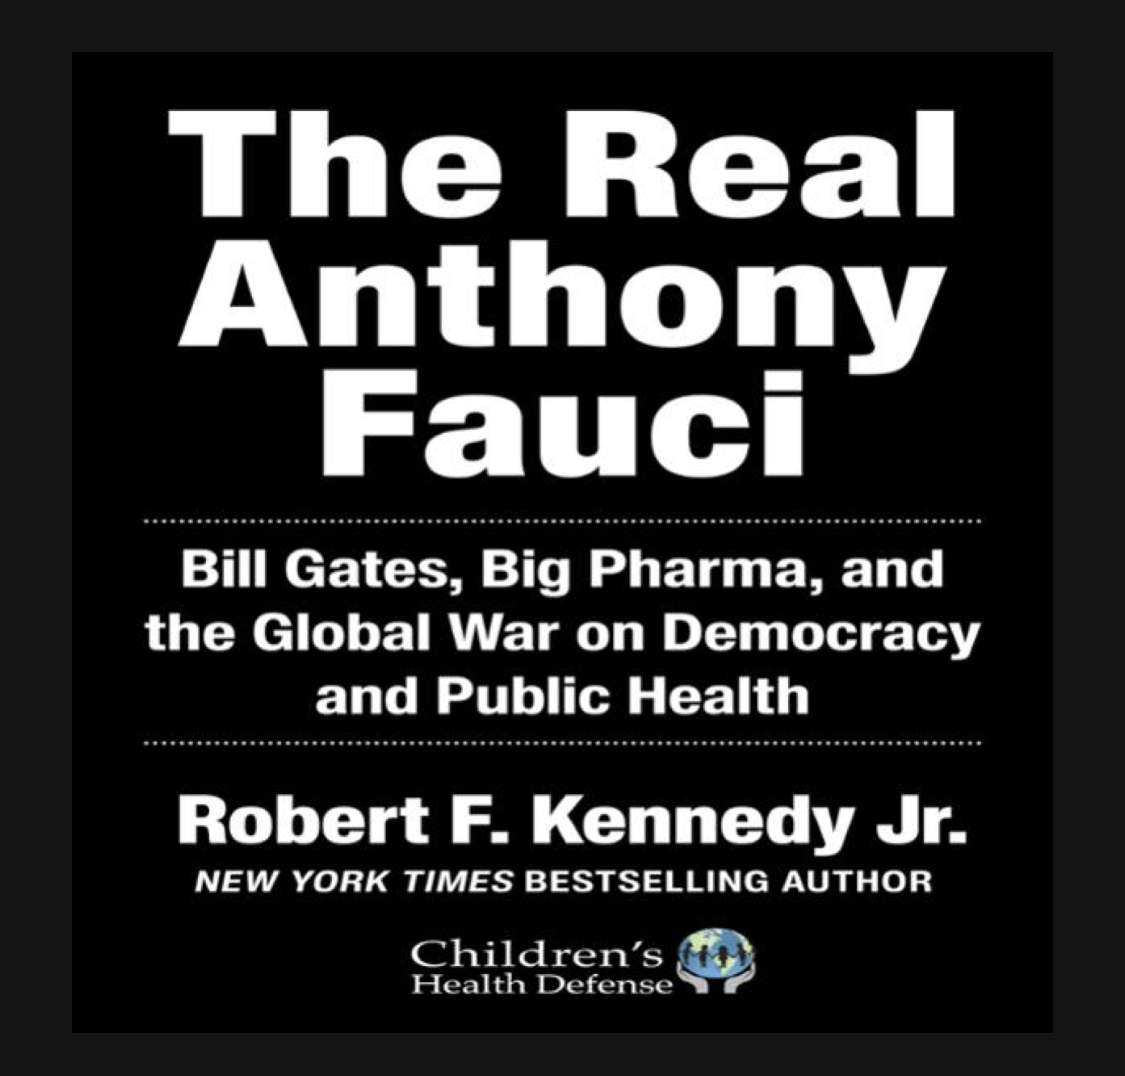 The Real Anthony Fauci (Book Review)